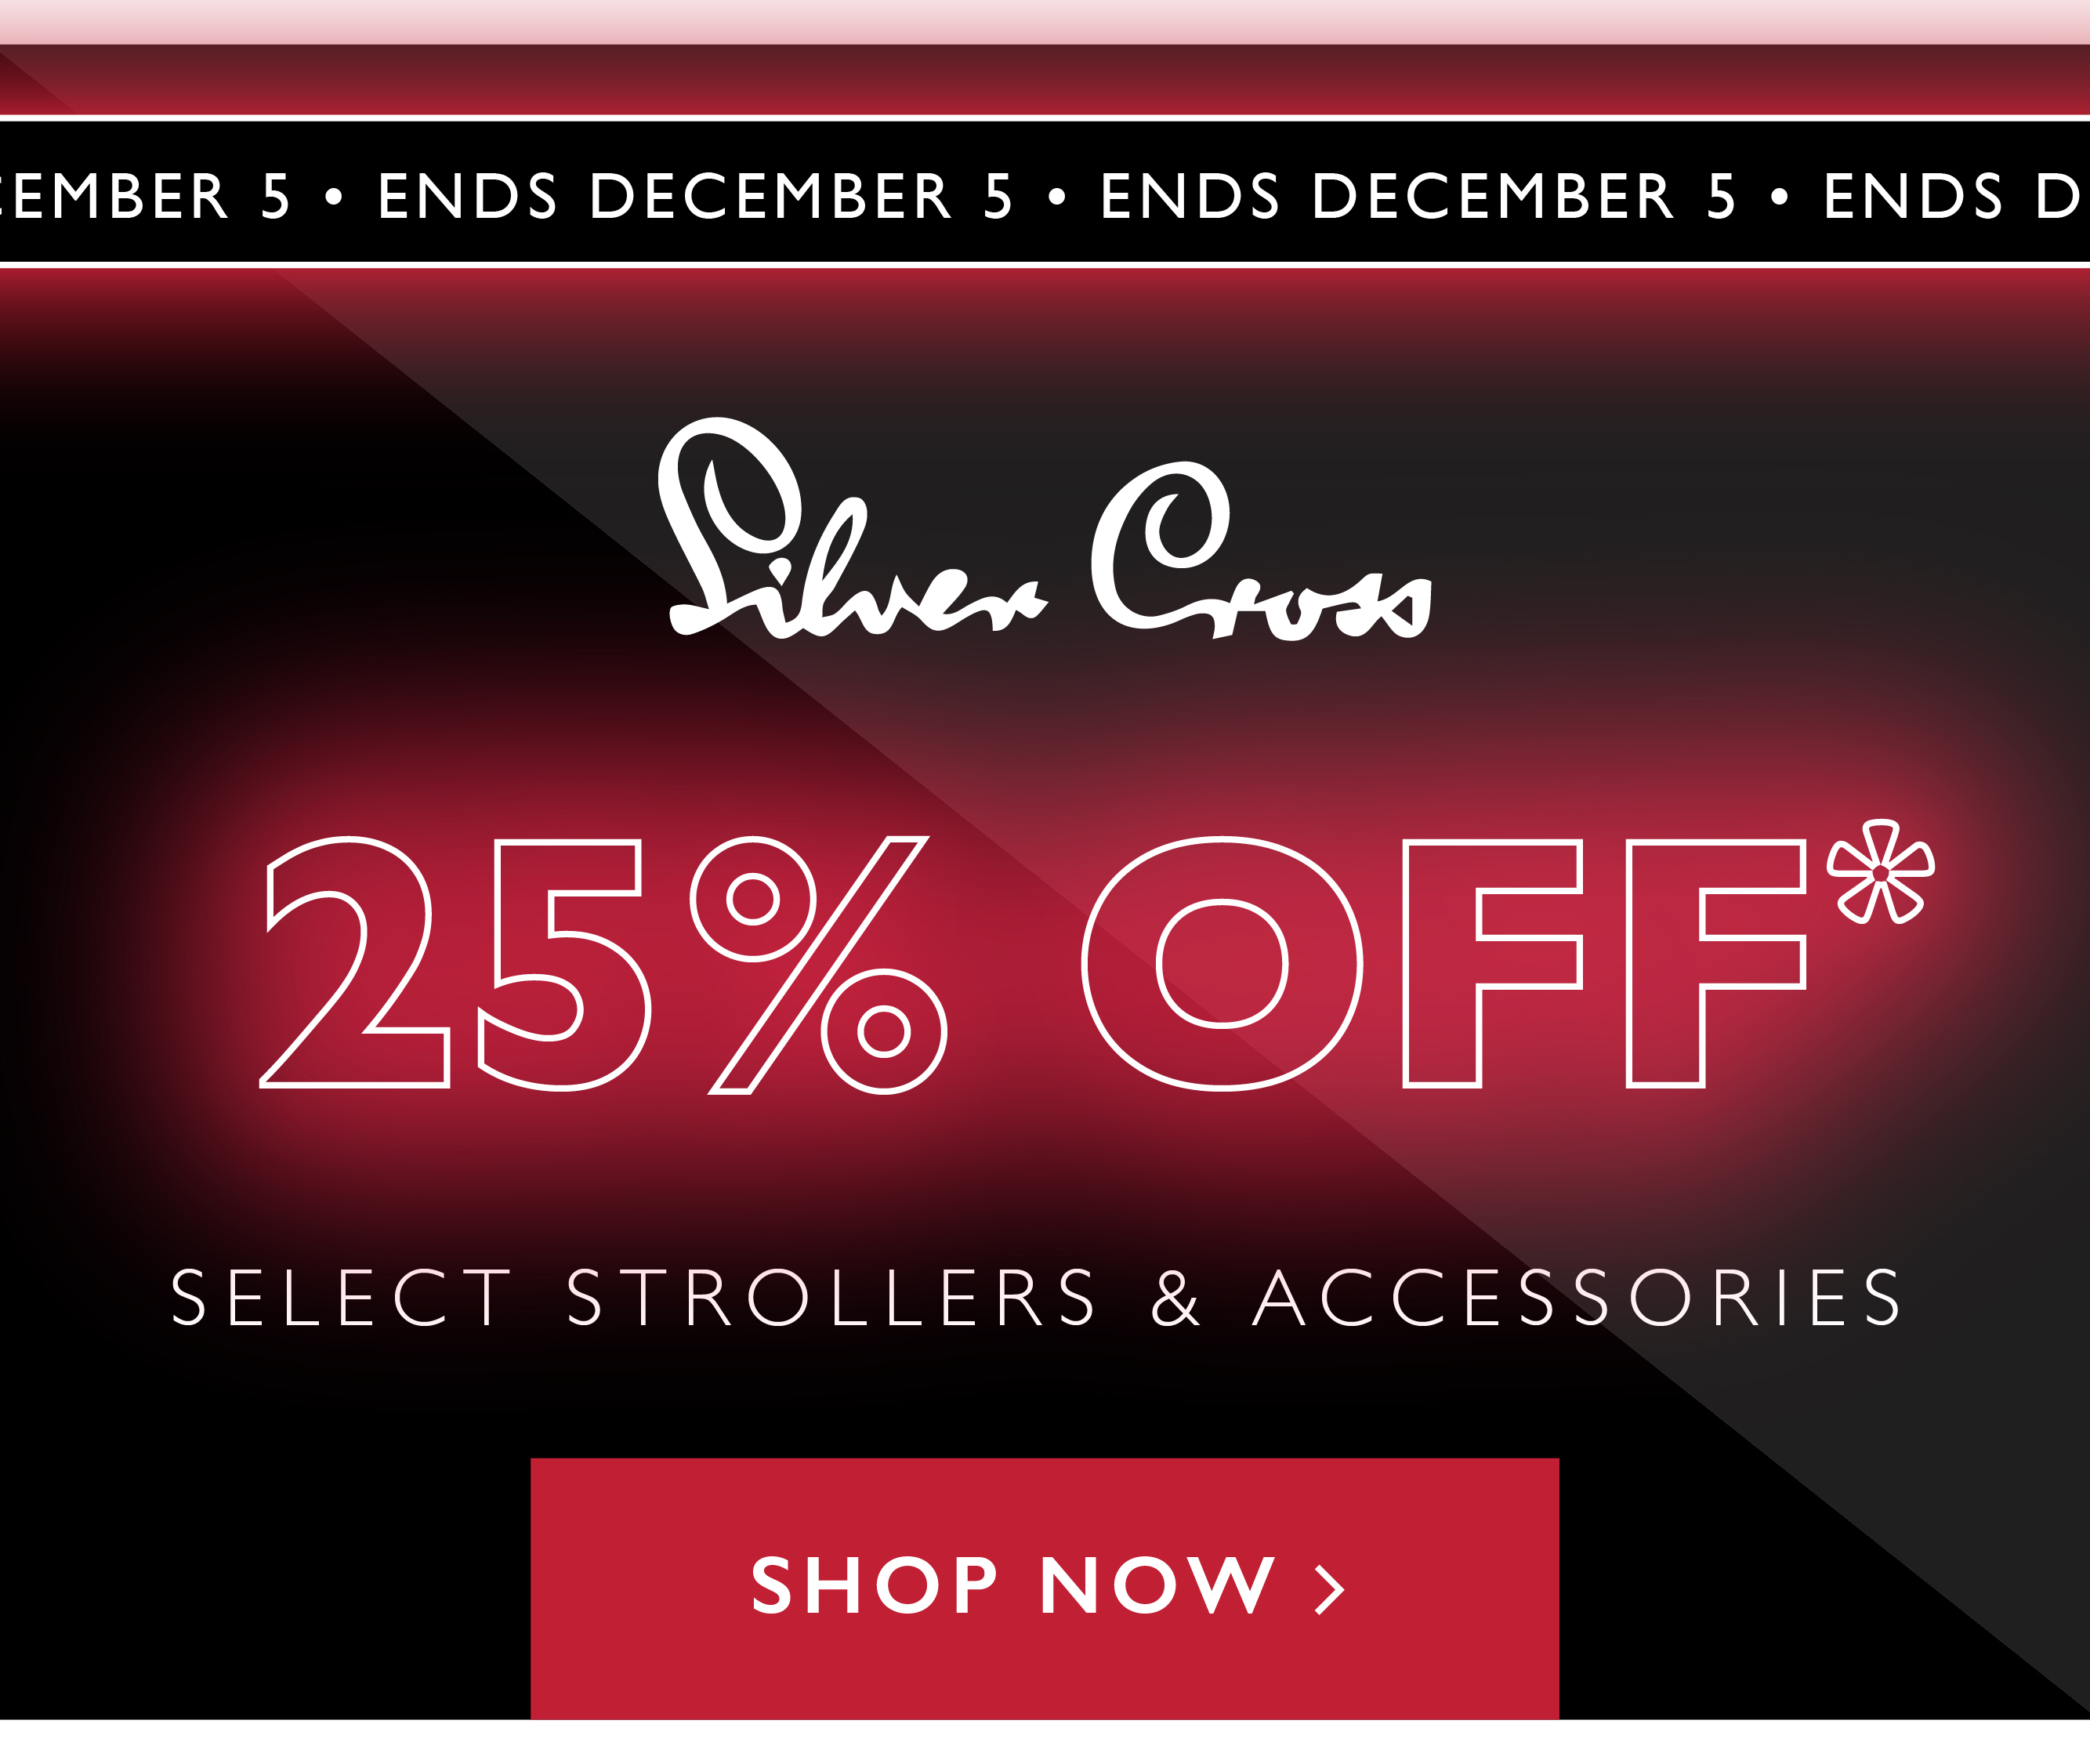  EMBER 5 ENDS DECEMBER 5 ENDS DECEMBER 5 ENDS D g Woer Couso 5% 5%% SELECT STROLLERS ACCESSORIES SHOP NOW 